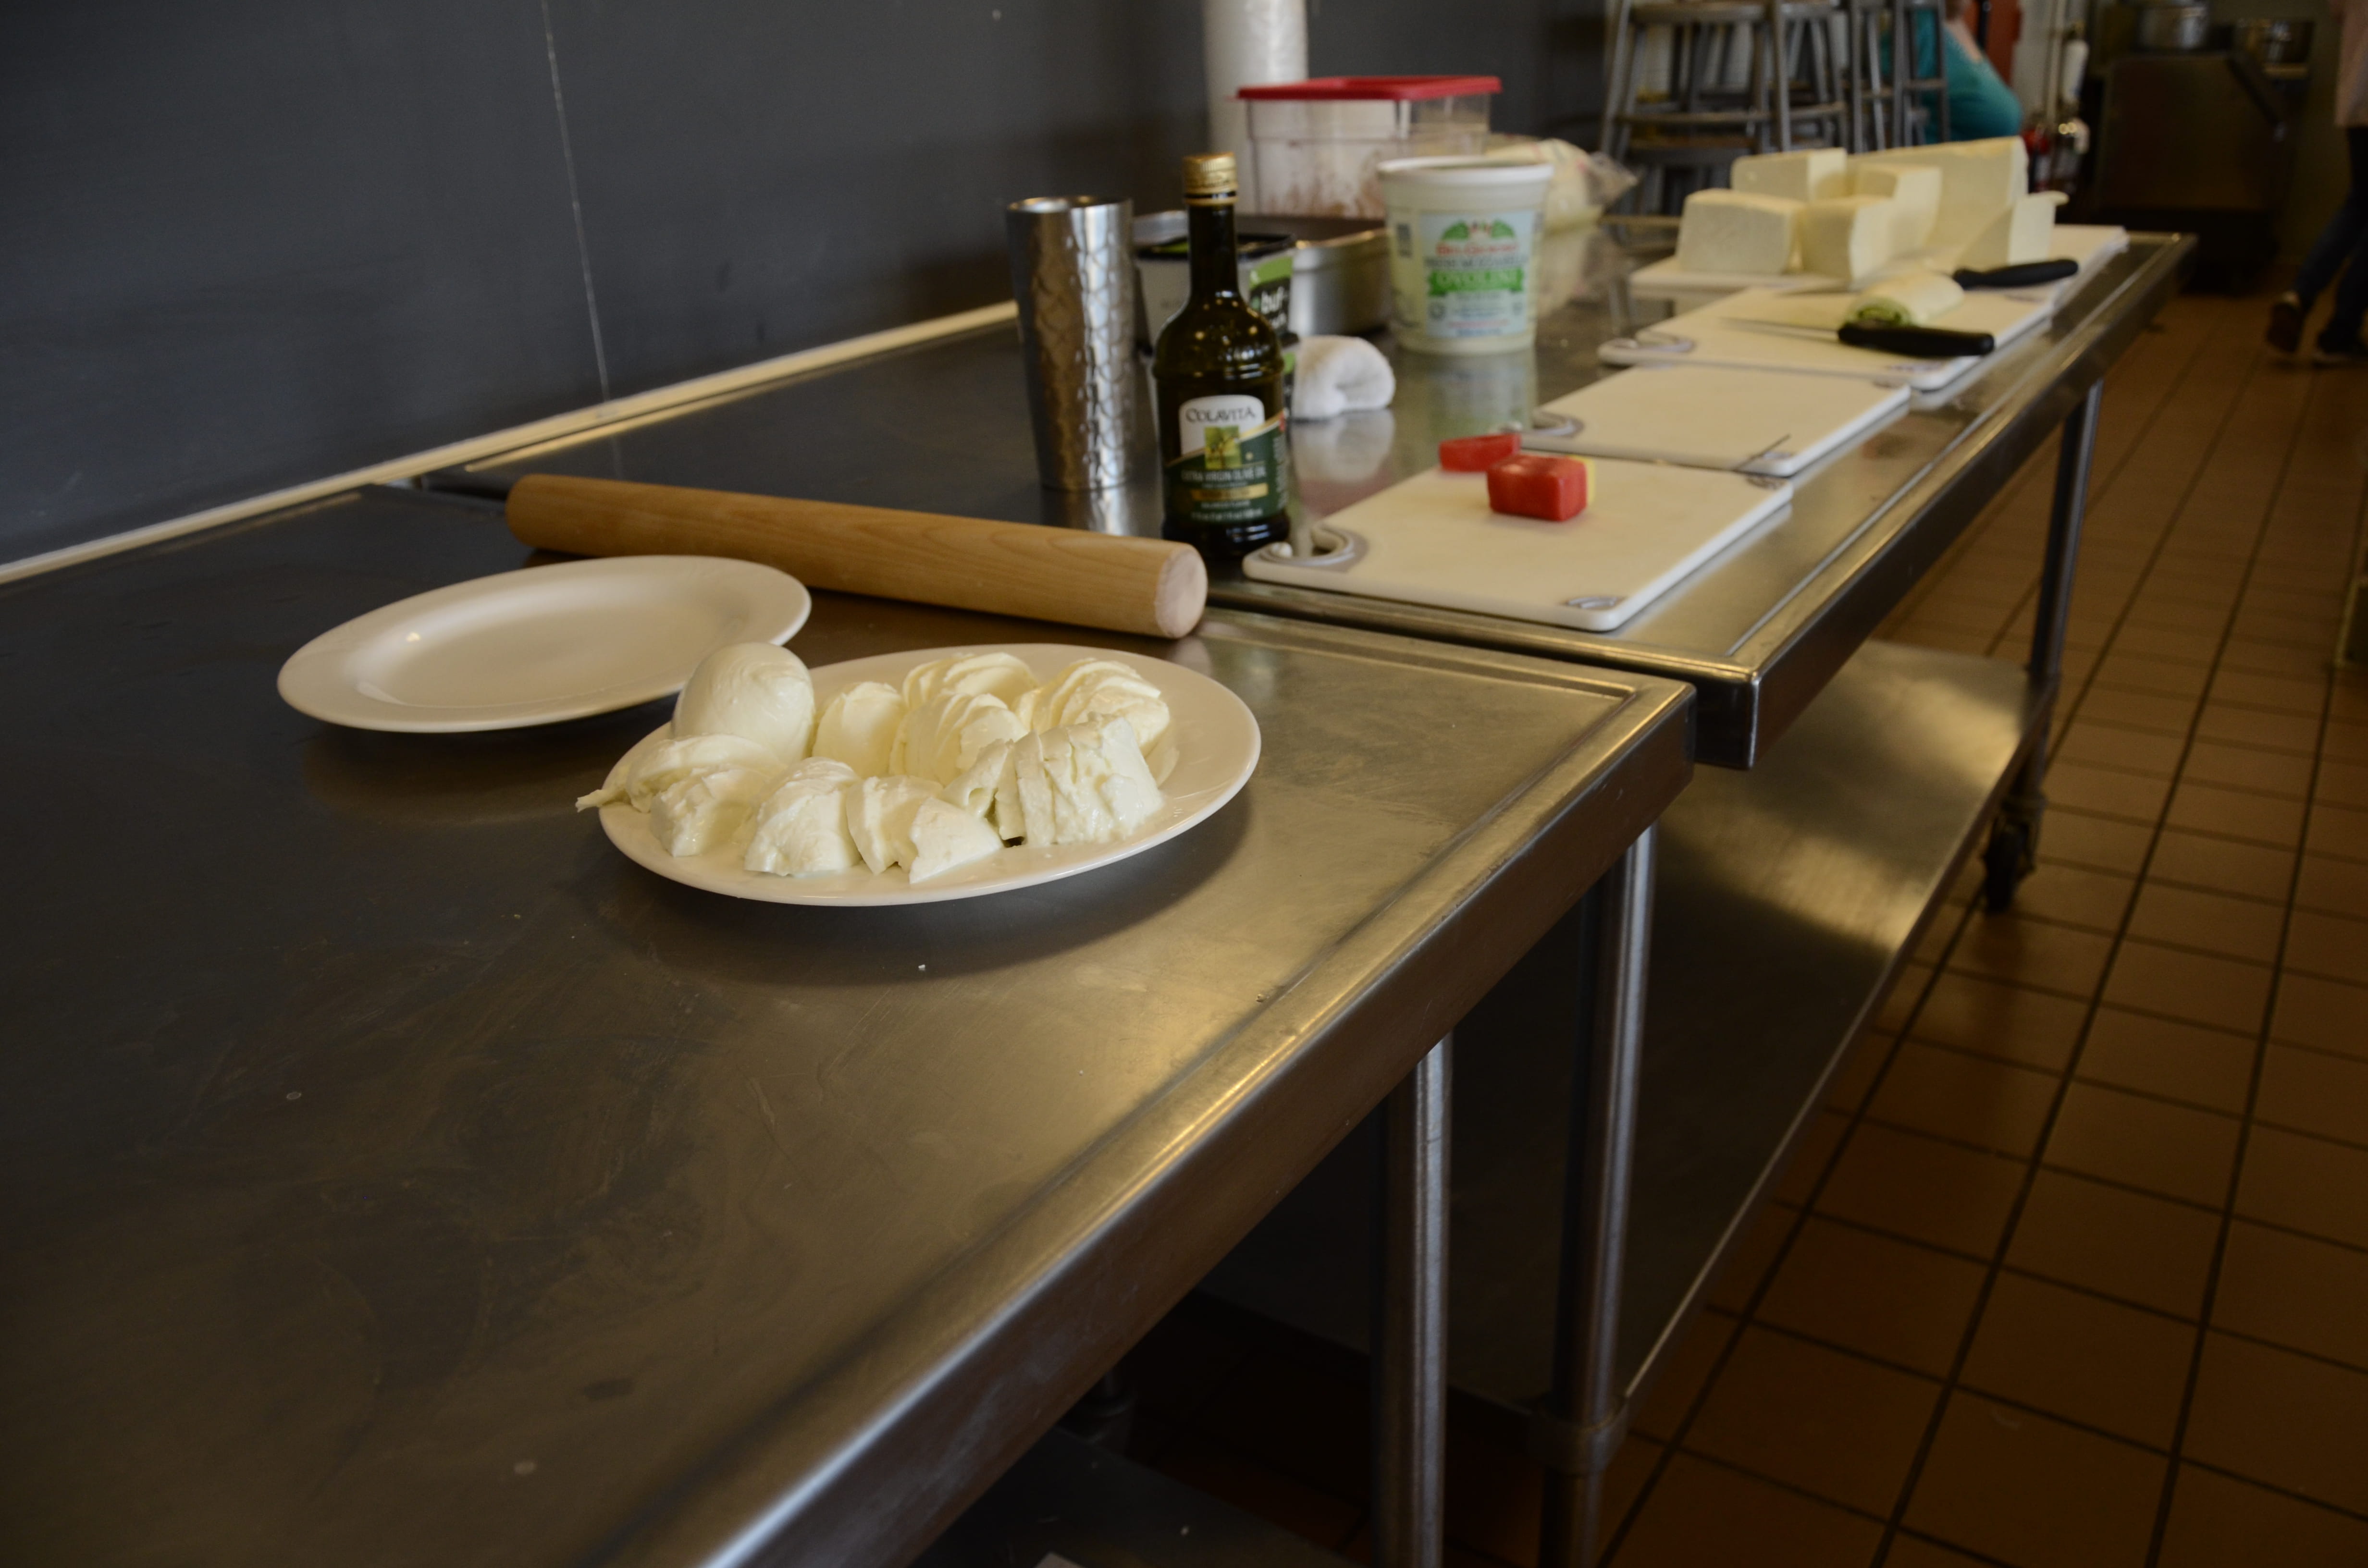 A sample of what the students could taste during the mozzarella-making class, from left to right: store-bought mozzarellas, the waxed cheddar from the last class, a rolled mozzarella with pesto and prosciutto, and the mozzarella that the students would heat, stretch and shape.